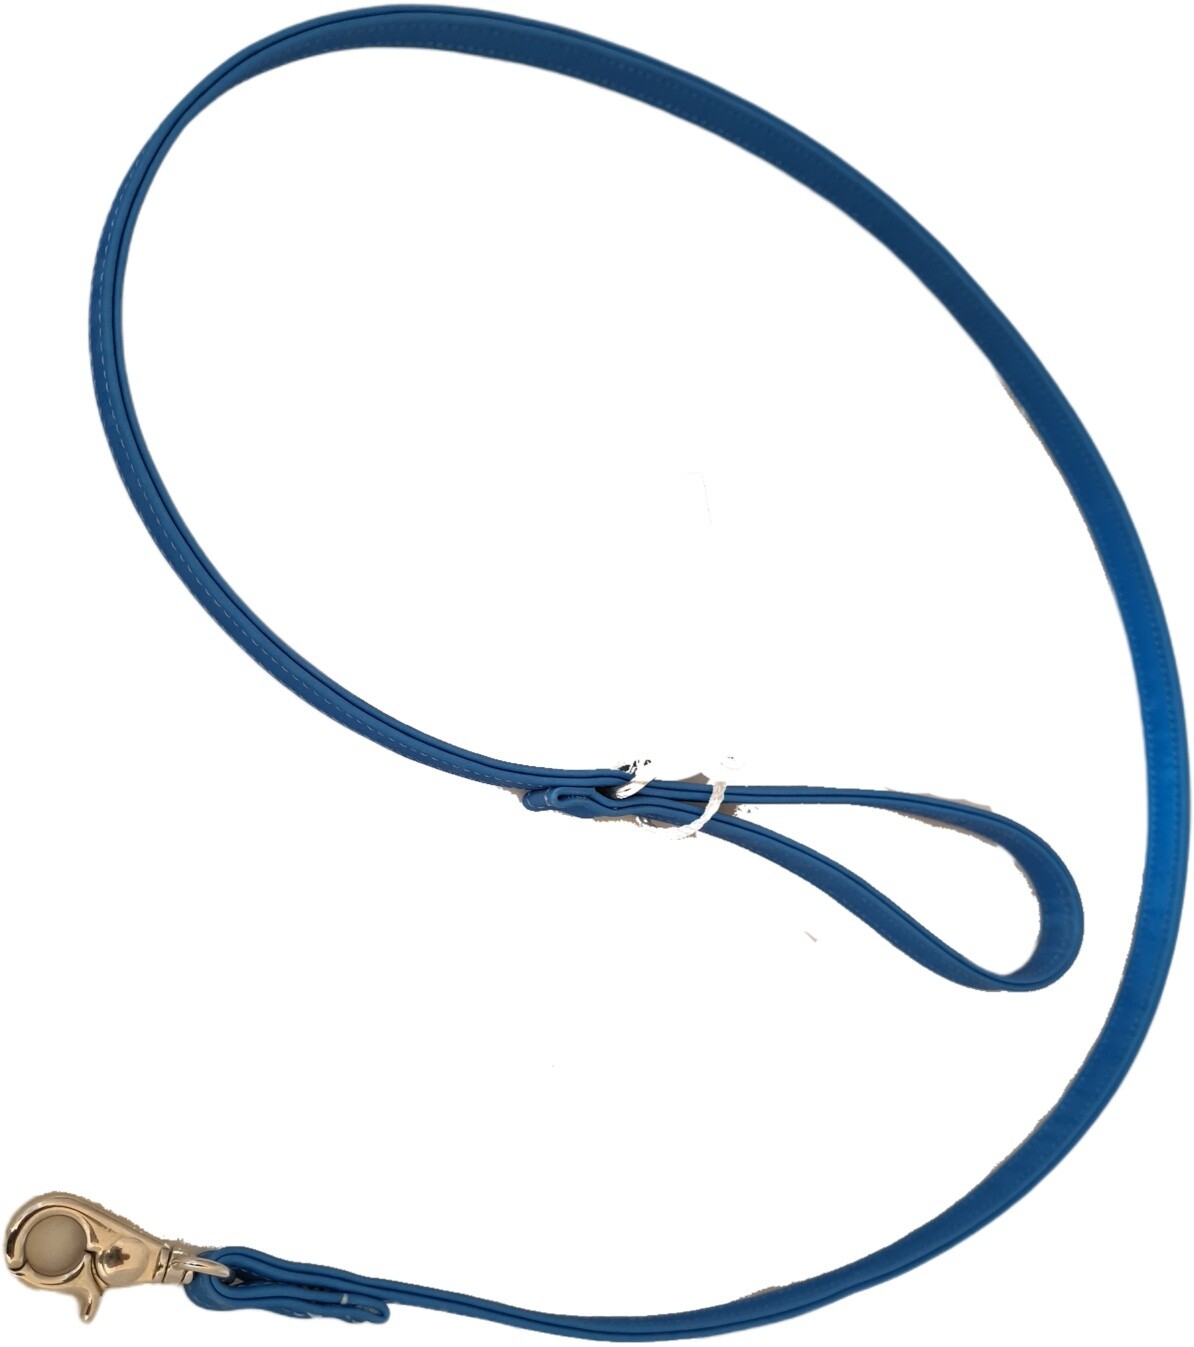 Lione Leash Trilly 24 light blue relief - Stock